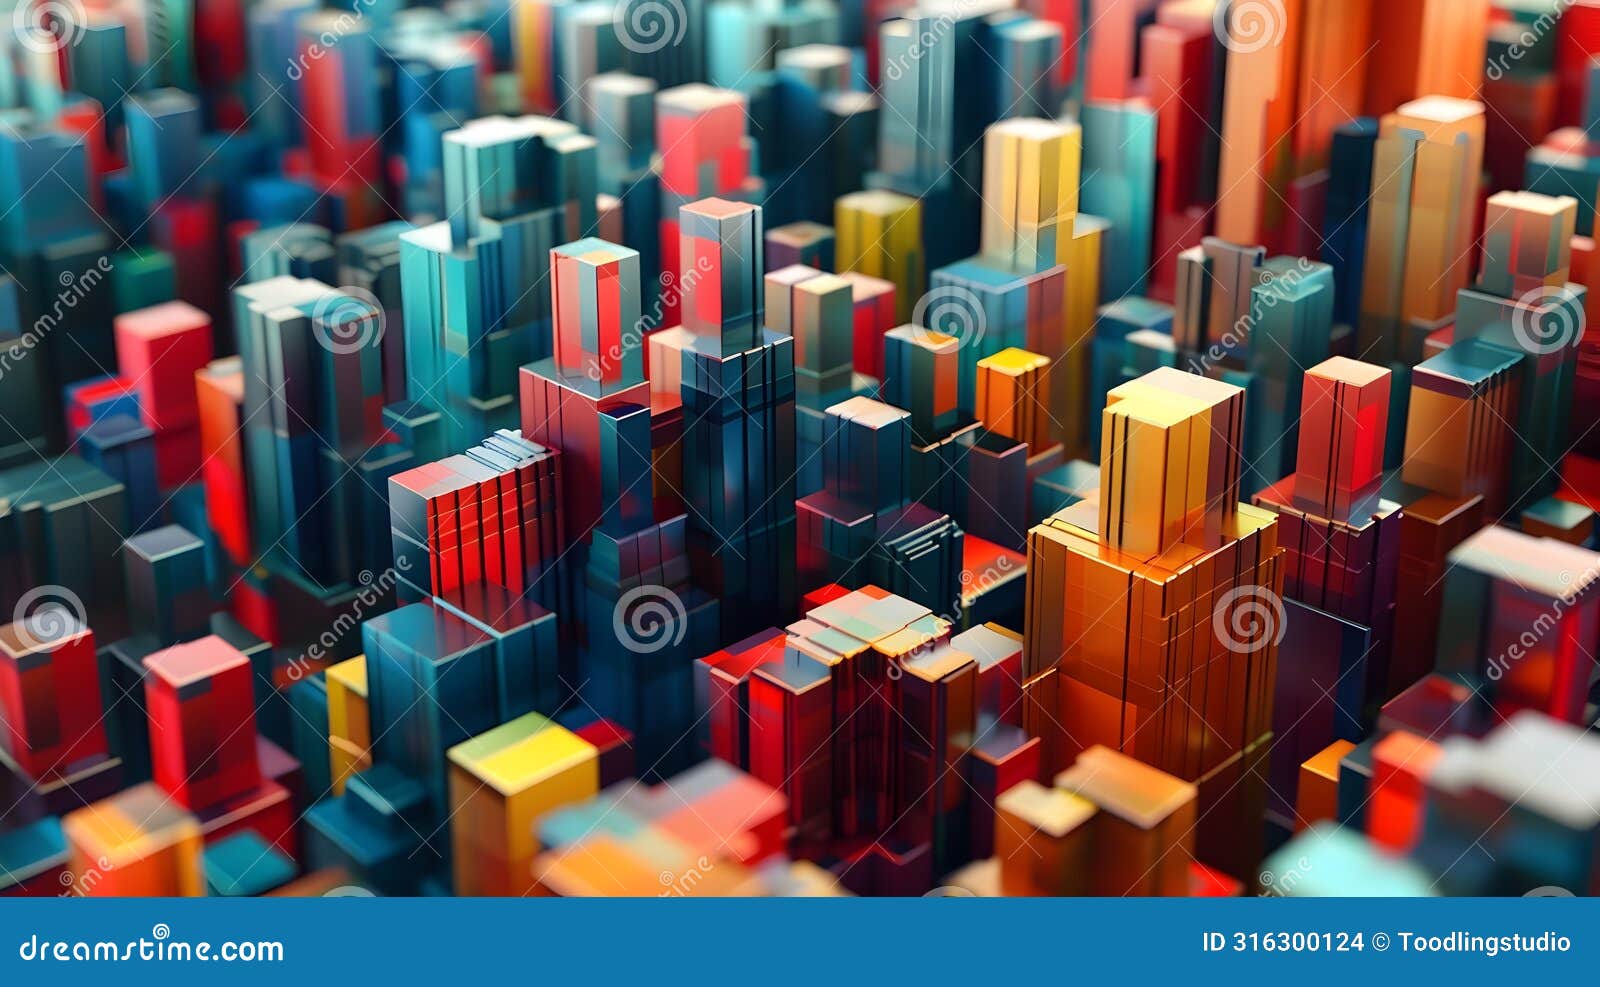 vibrant geometric cityscape of abstract architectural blocks in unconventional arrangements with modern aesthetic and highly